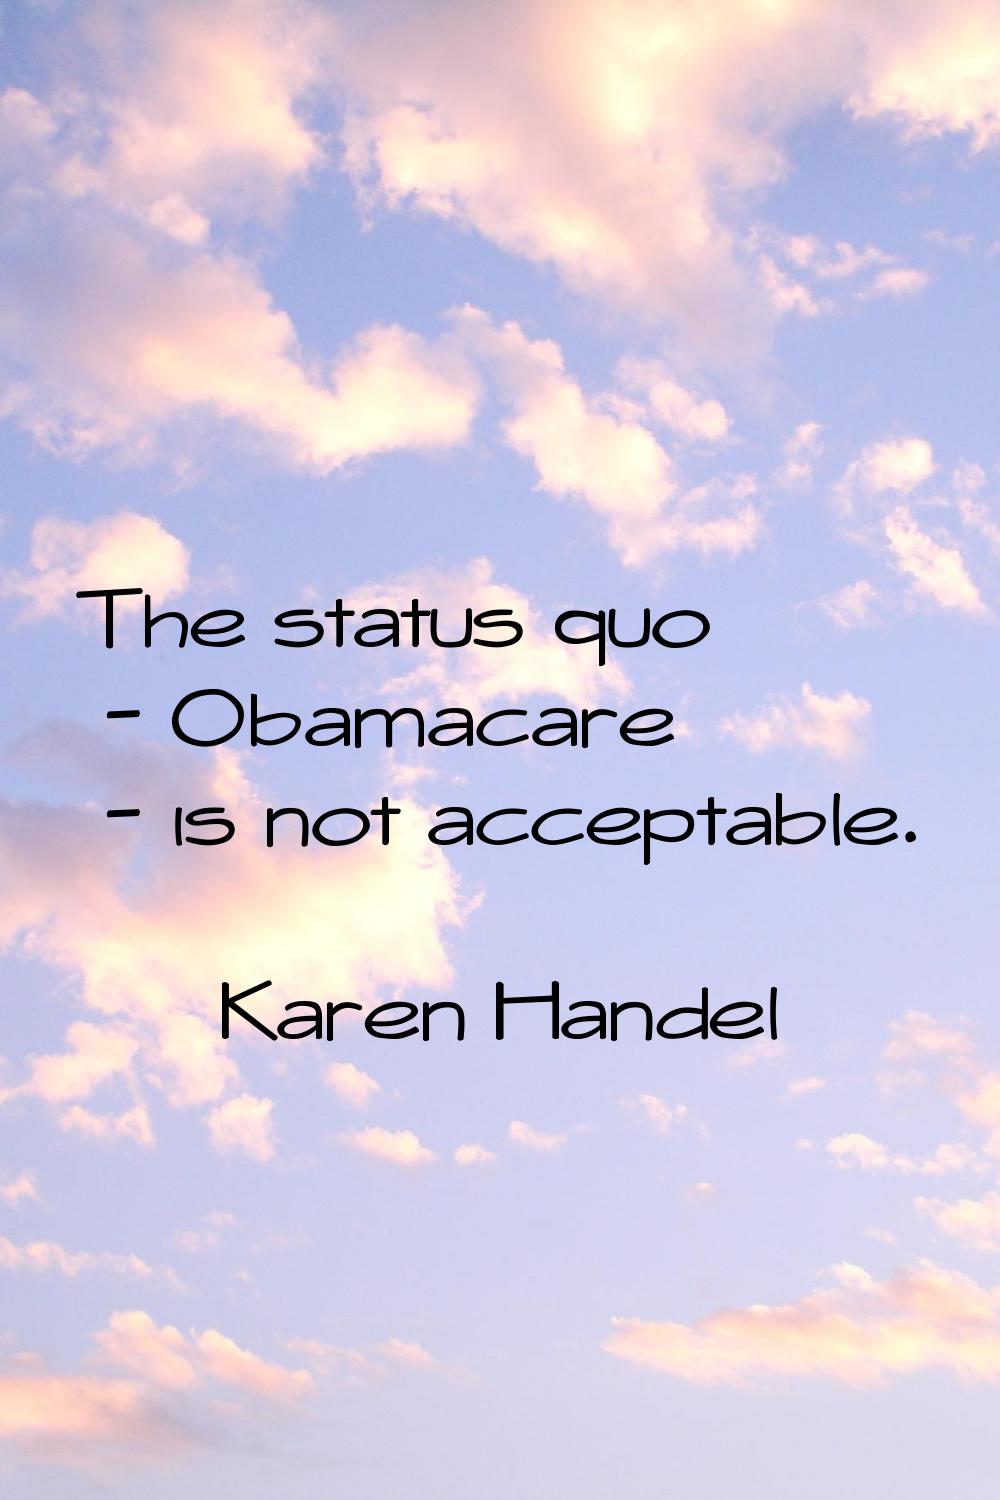 The status quo - Obamacare - is not acceptable.